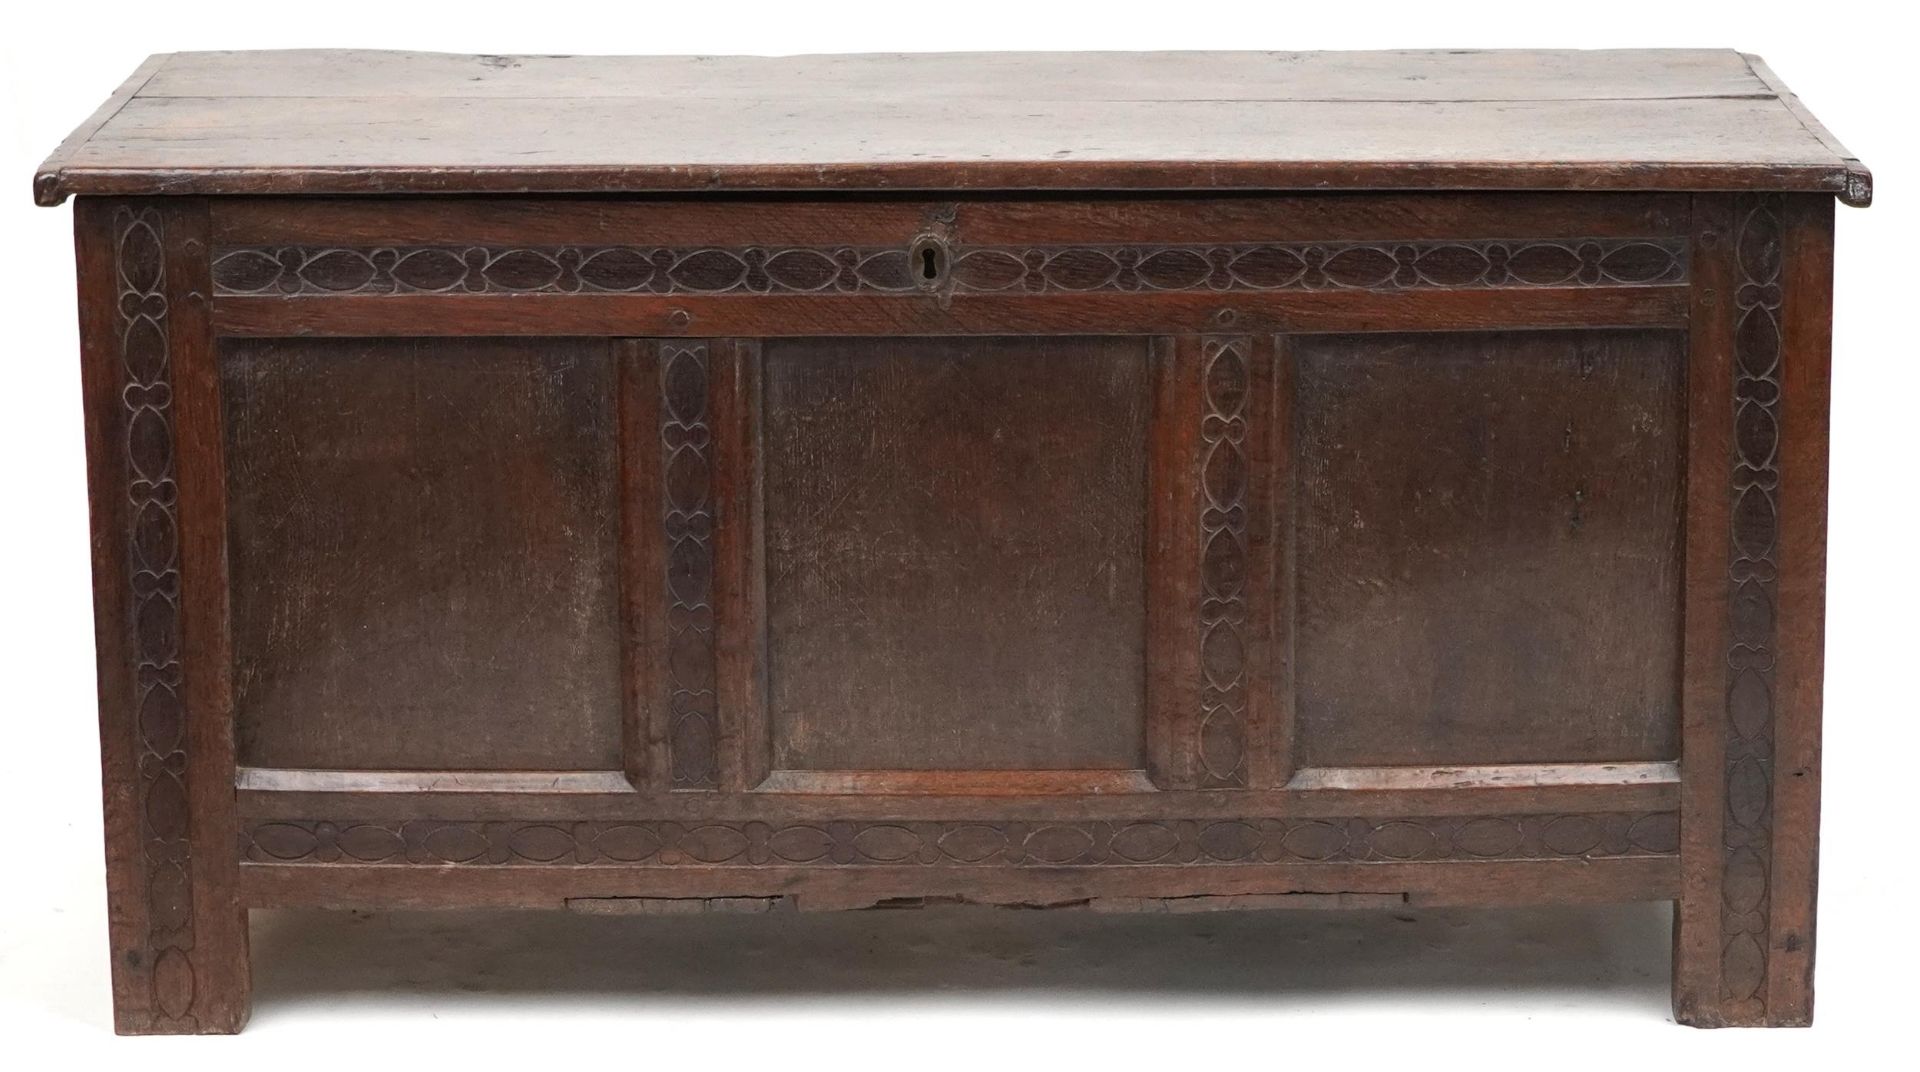 17th/18th century oak three panel coffer with carved borders, 59cm H x 118cm W x 51cm D - Image 4 of 6